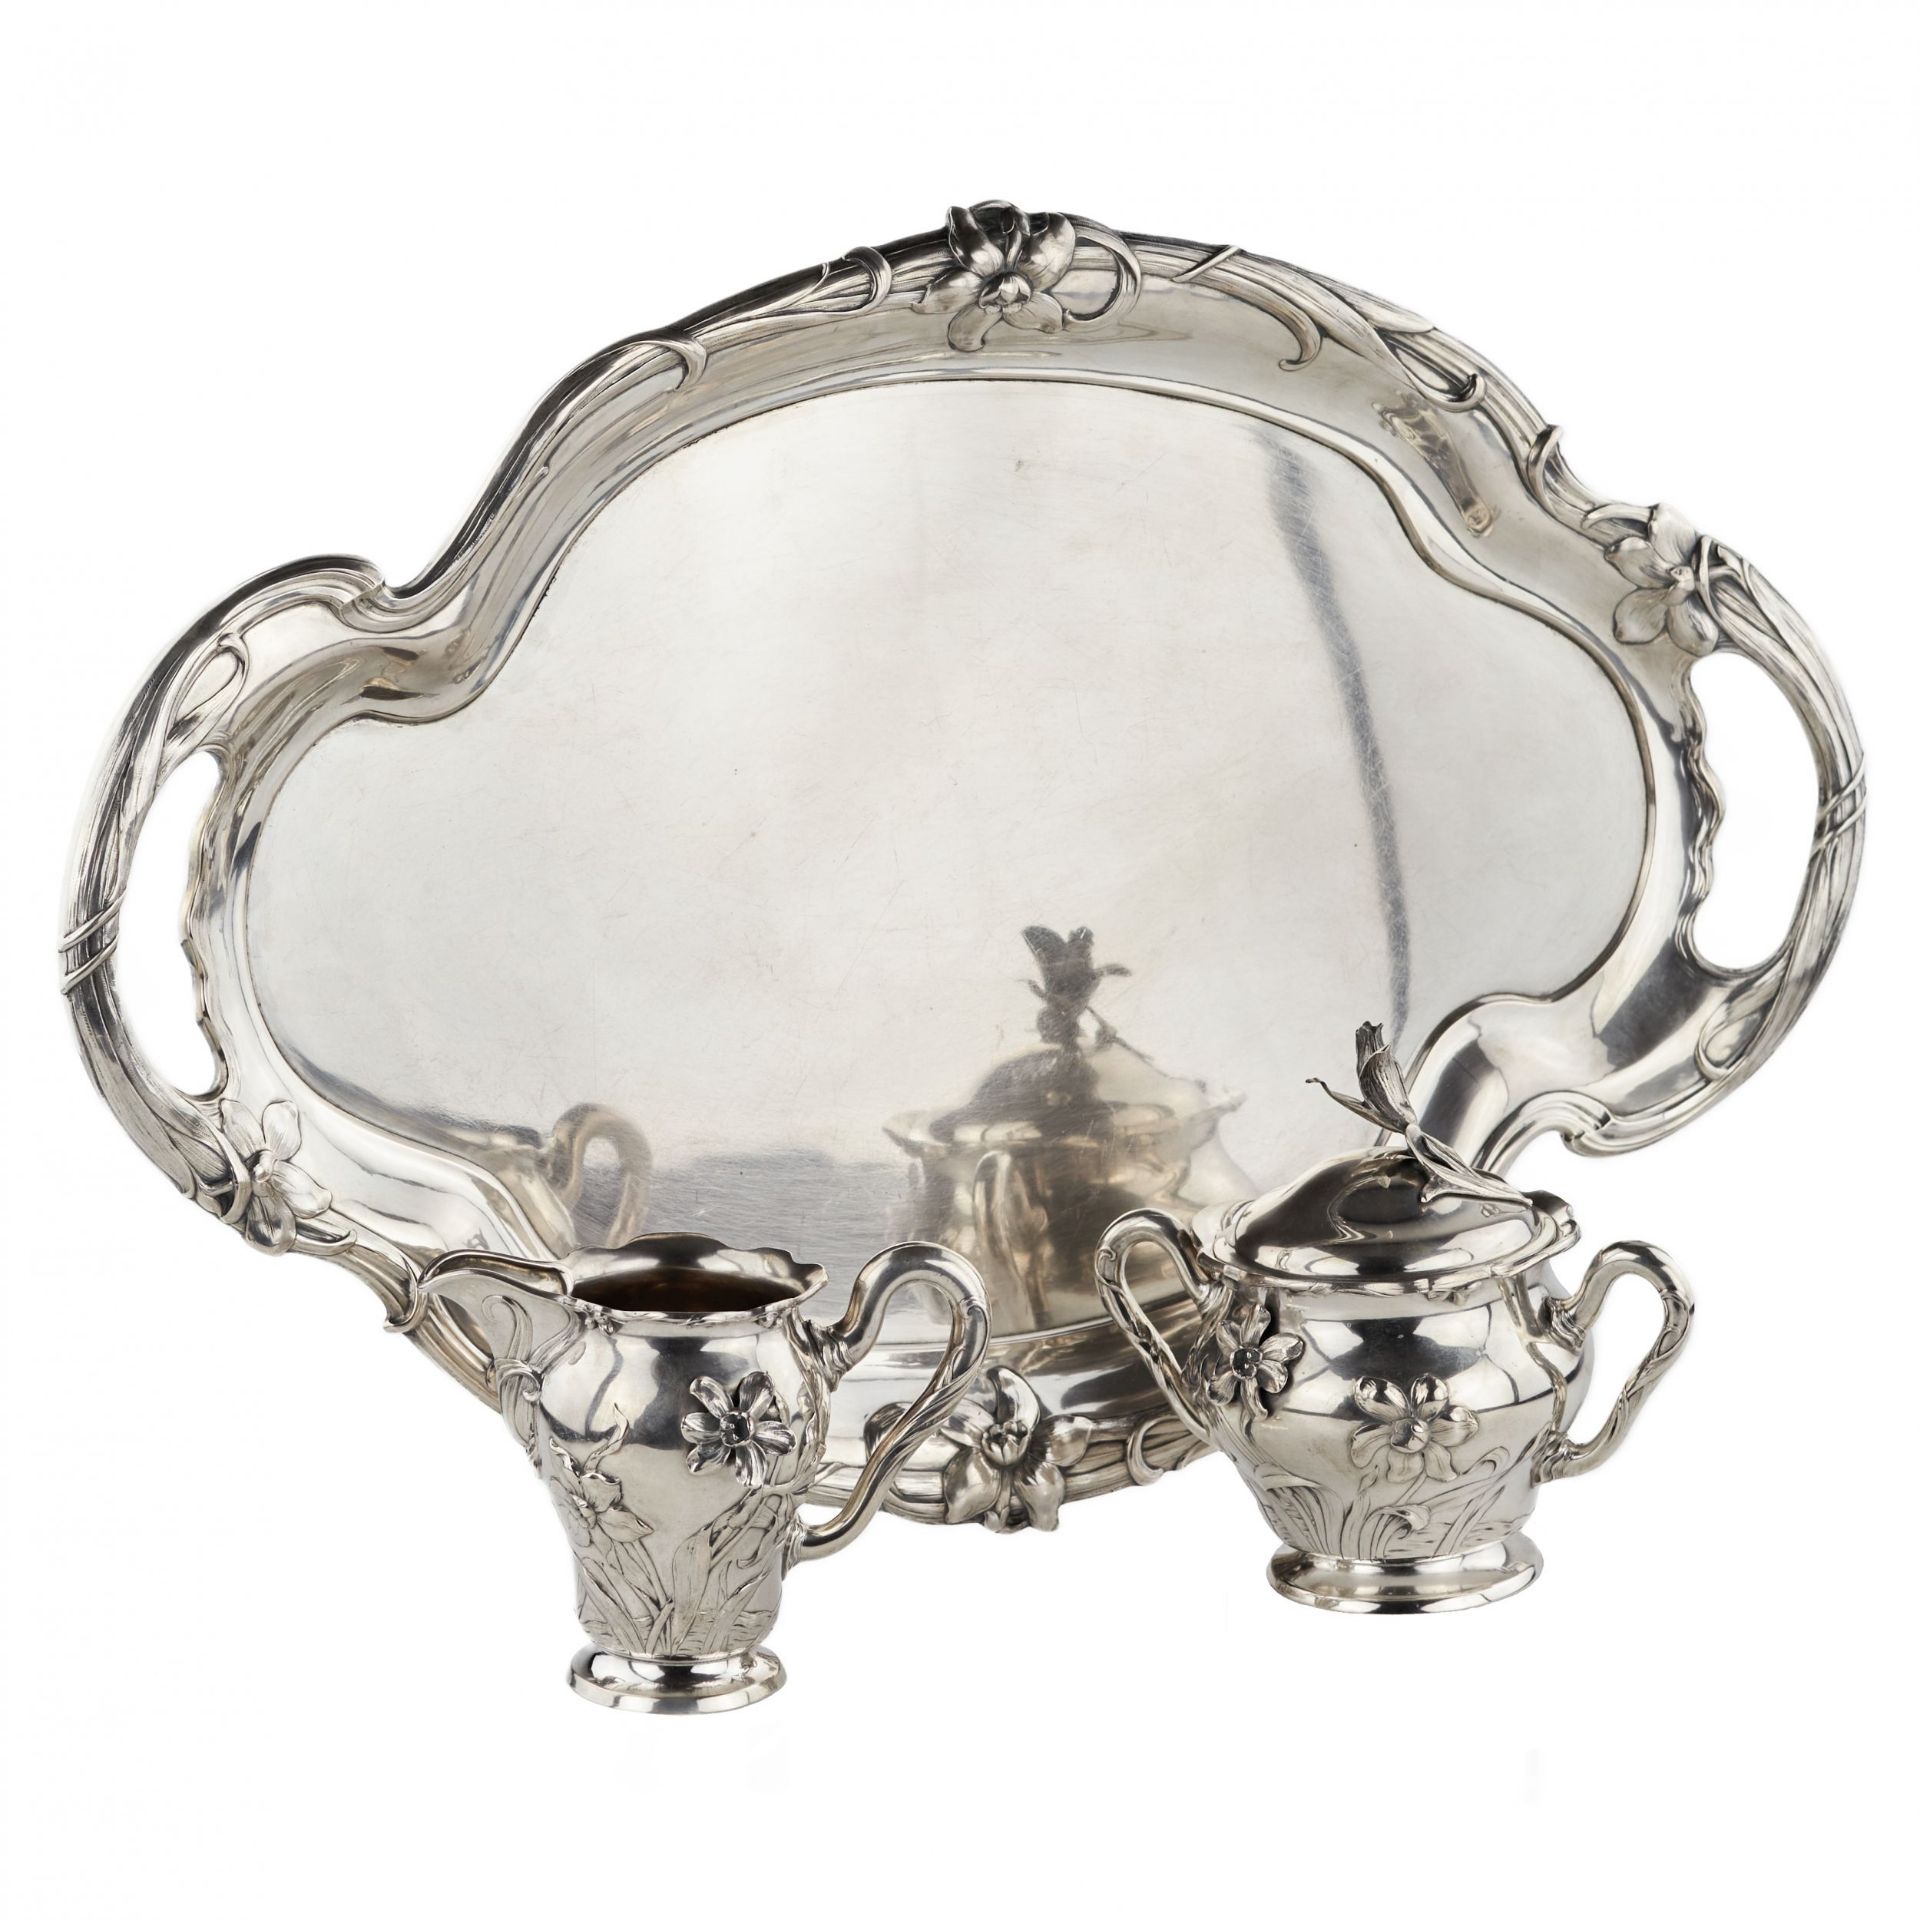 Silver tea and coffee service in Art Nouveau style. Bruckmann. After 1888. - Image 9 of 13